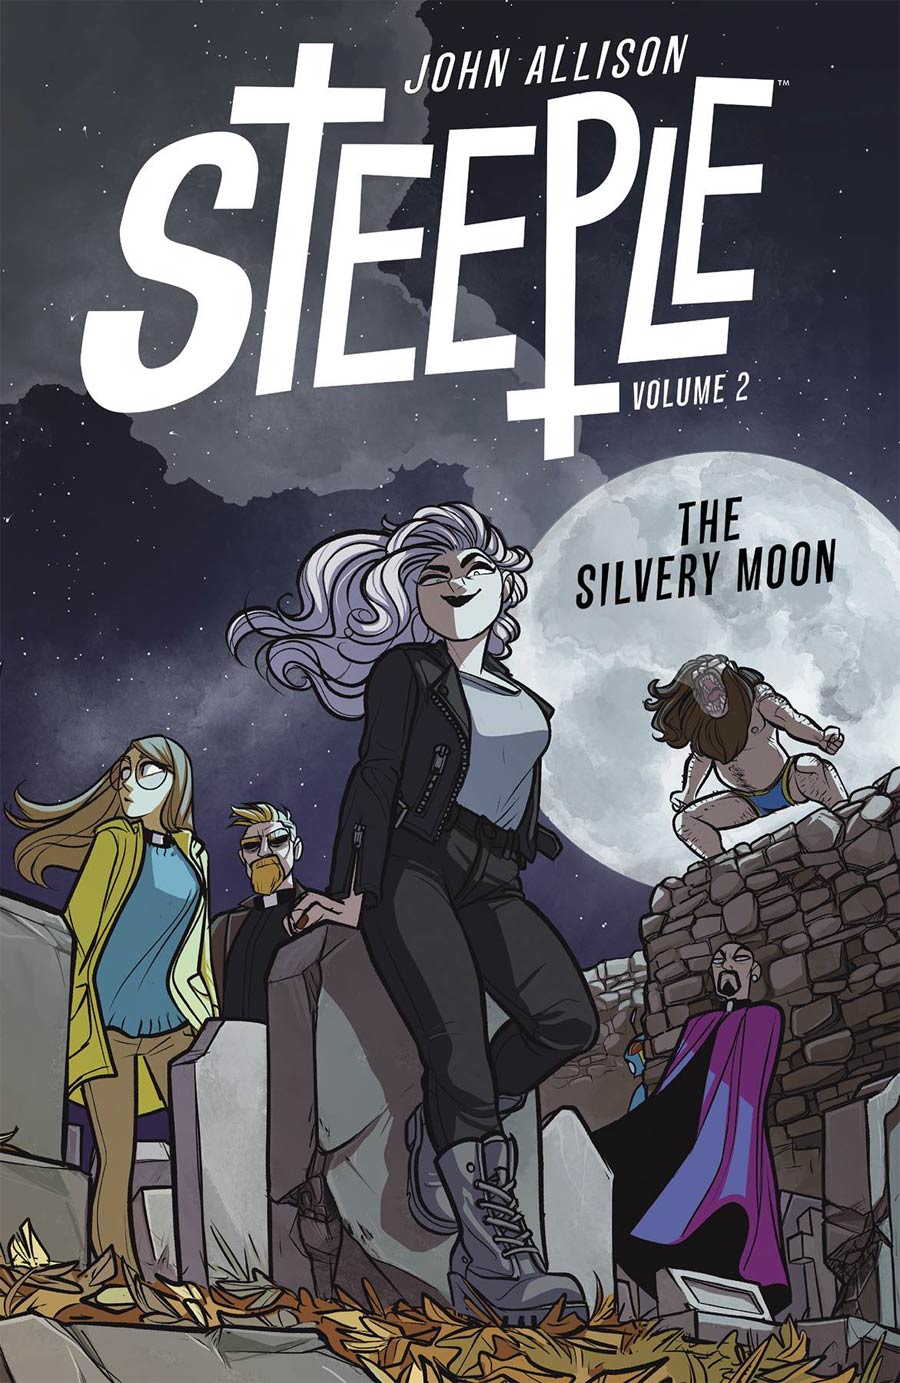 Steeple Vol 2 The Silvery Moon TP